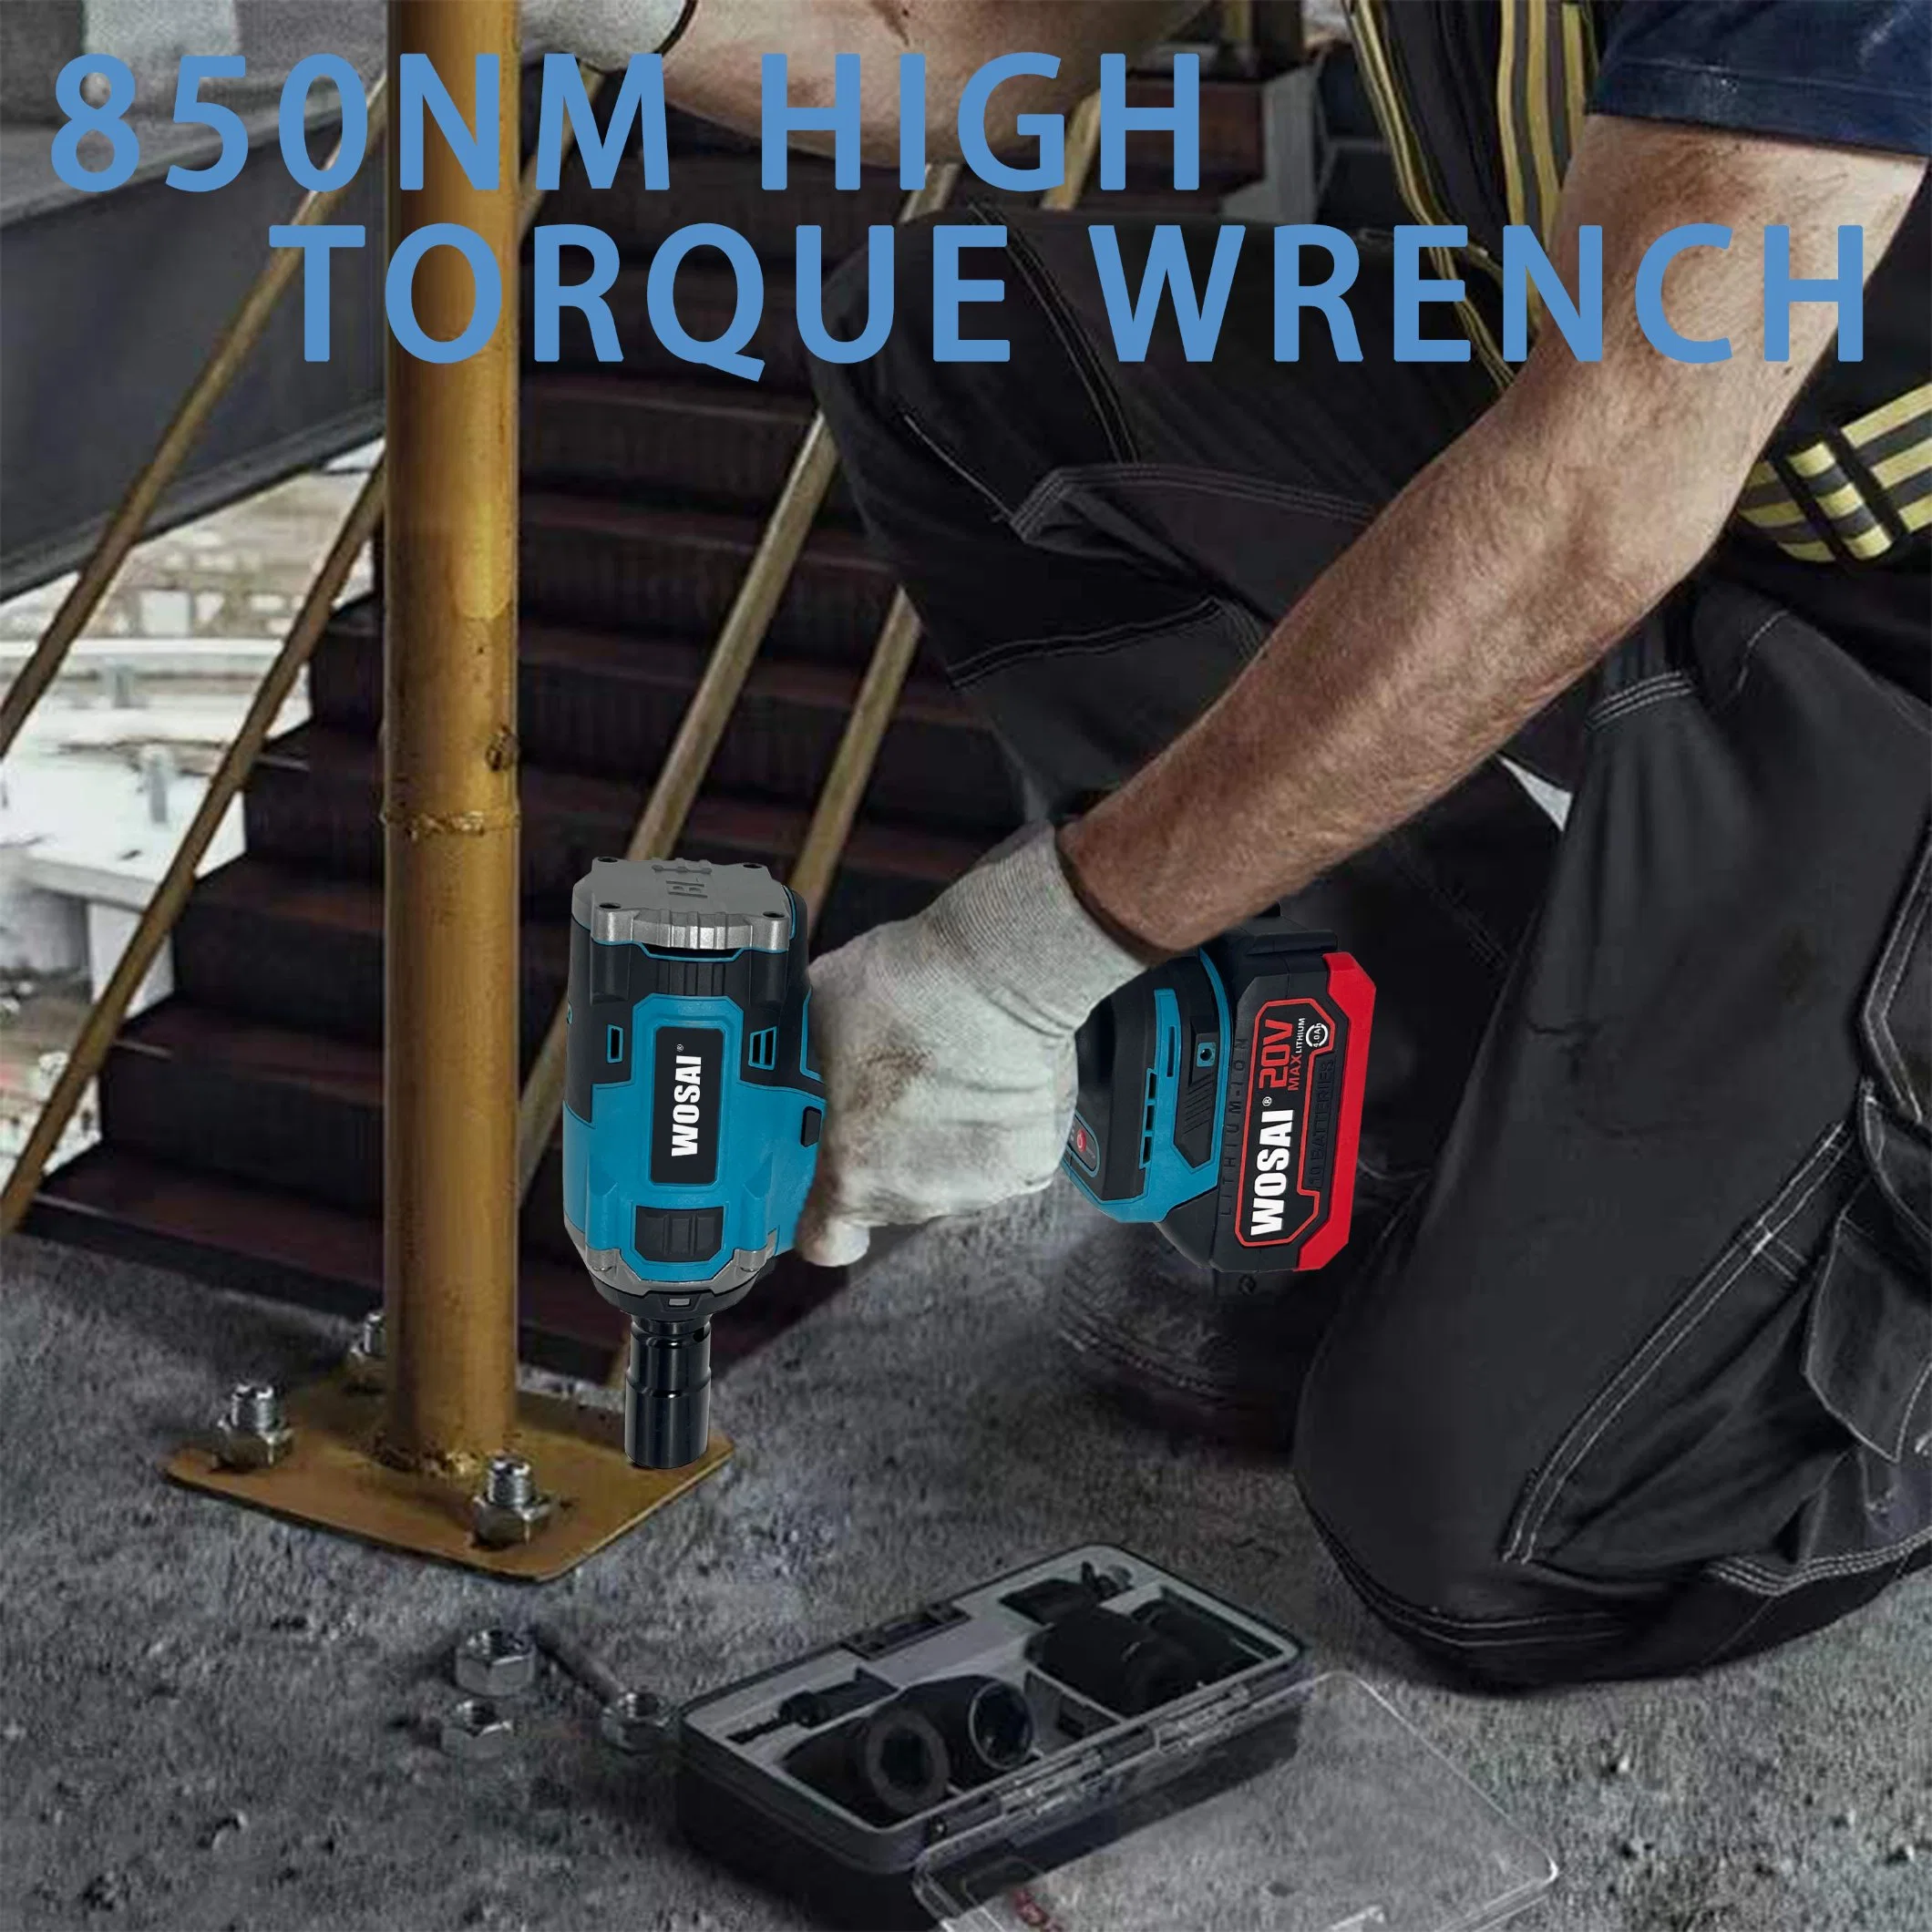 Wosai Home Use Handheld 20V 850nm Multi-Function High Torque Electric Impact Brushless Wrench